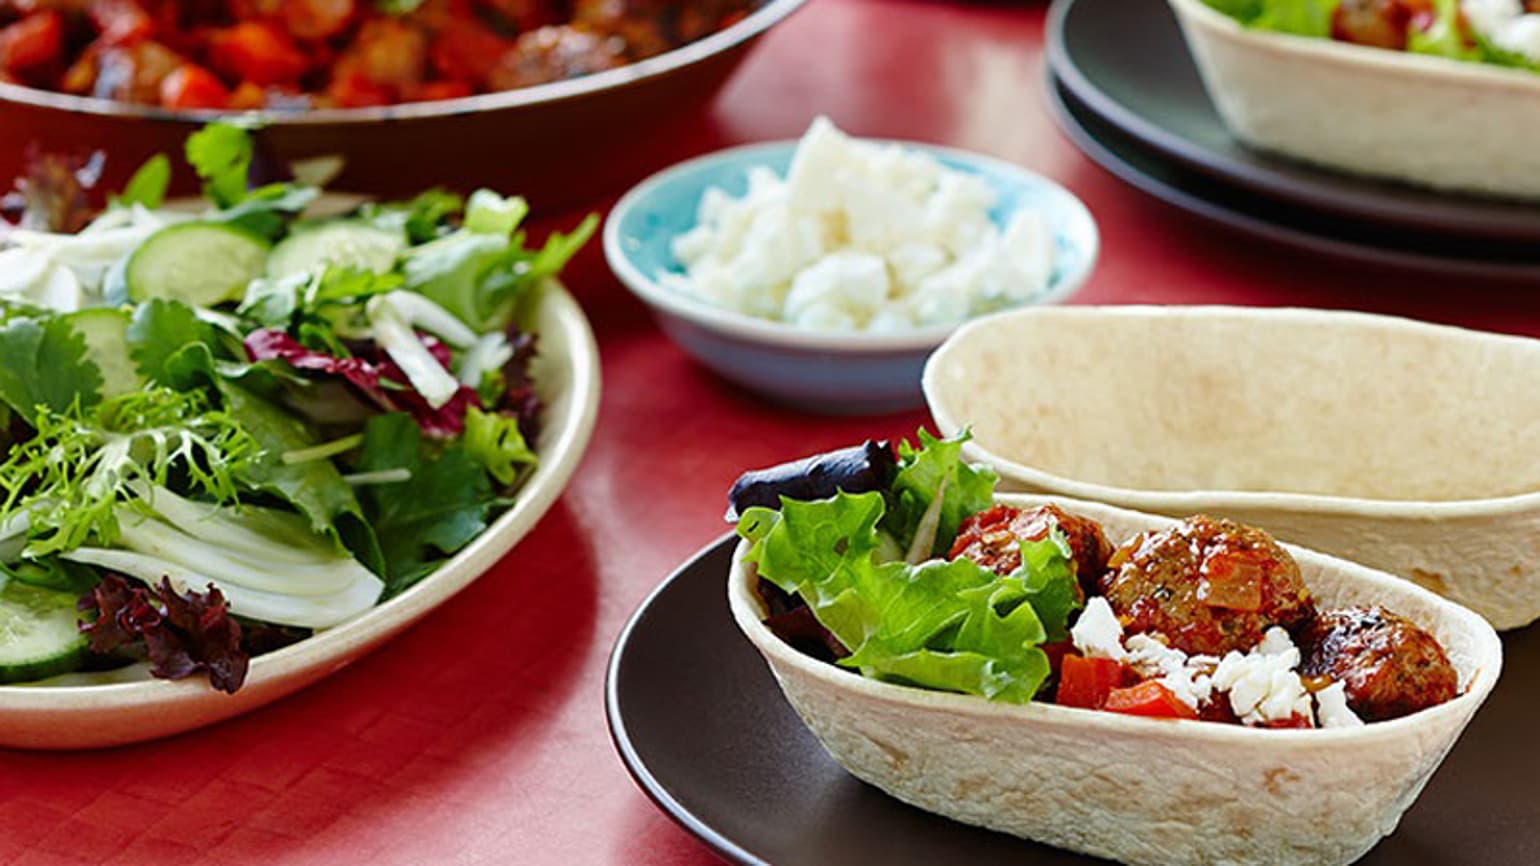 Stand ’n Stuff™ Soft Tacos with Pork Meatballs and Cucumber & Fennel Salad Recipe